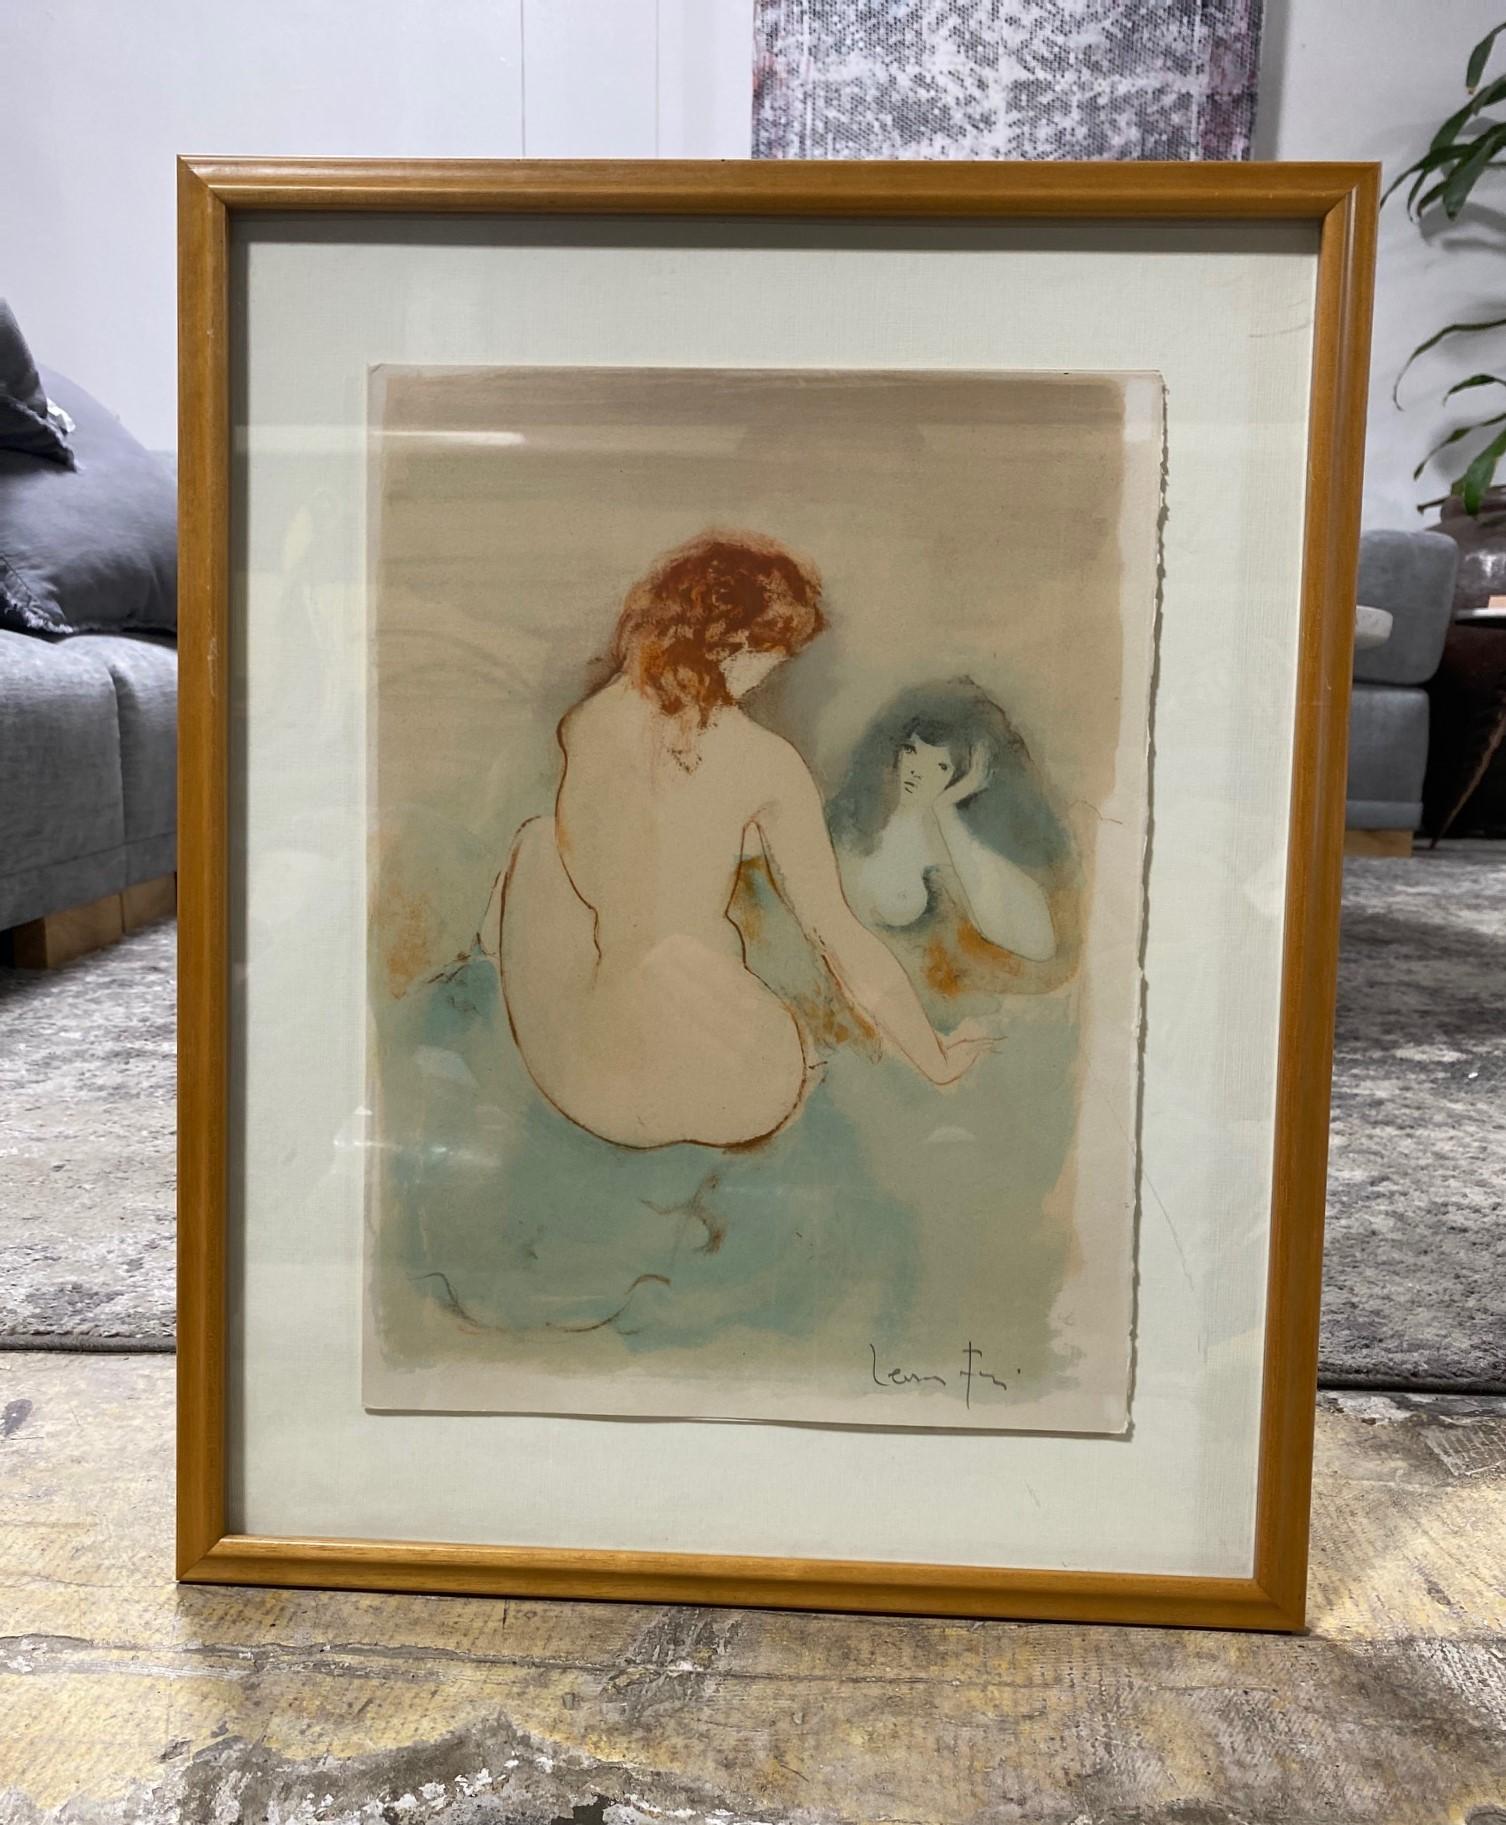 A beautiful lithographic print by Argentinian-born Italian surrealist painter, designer, illustrator, and author Leonor Fini titled 